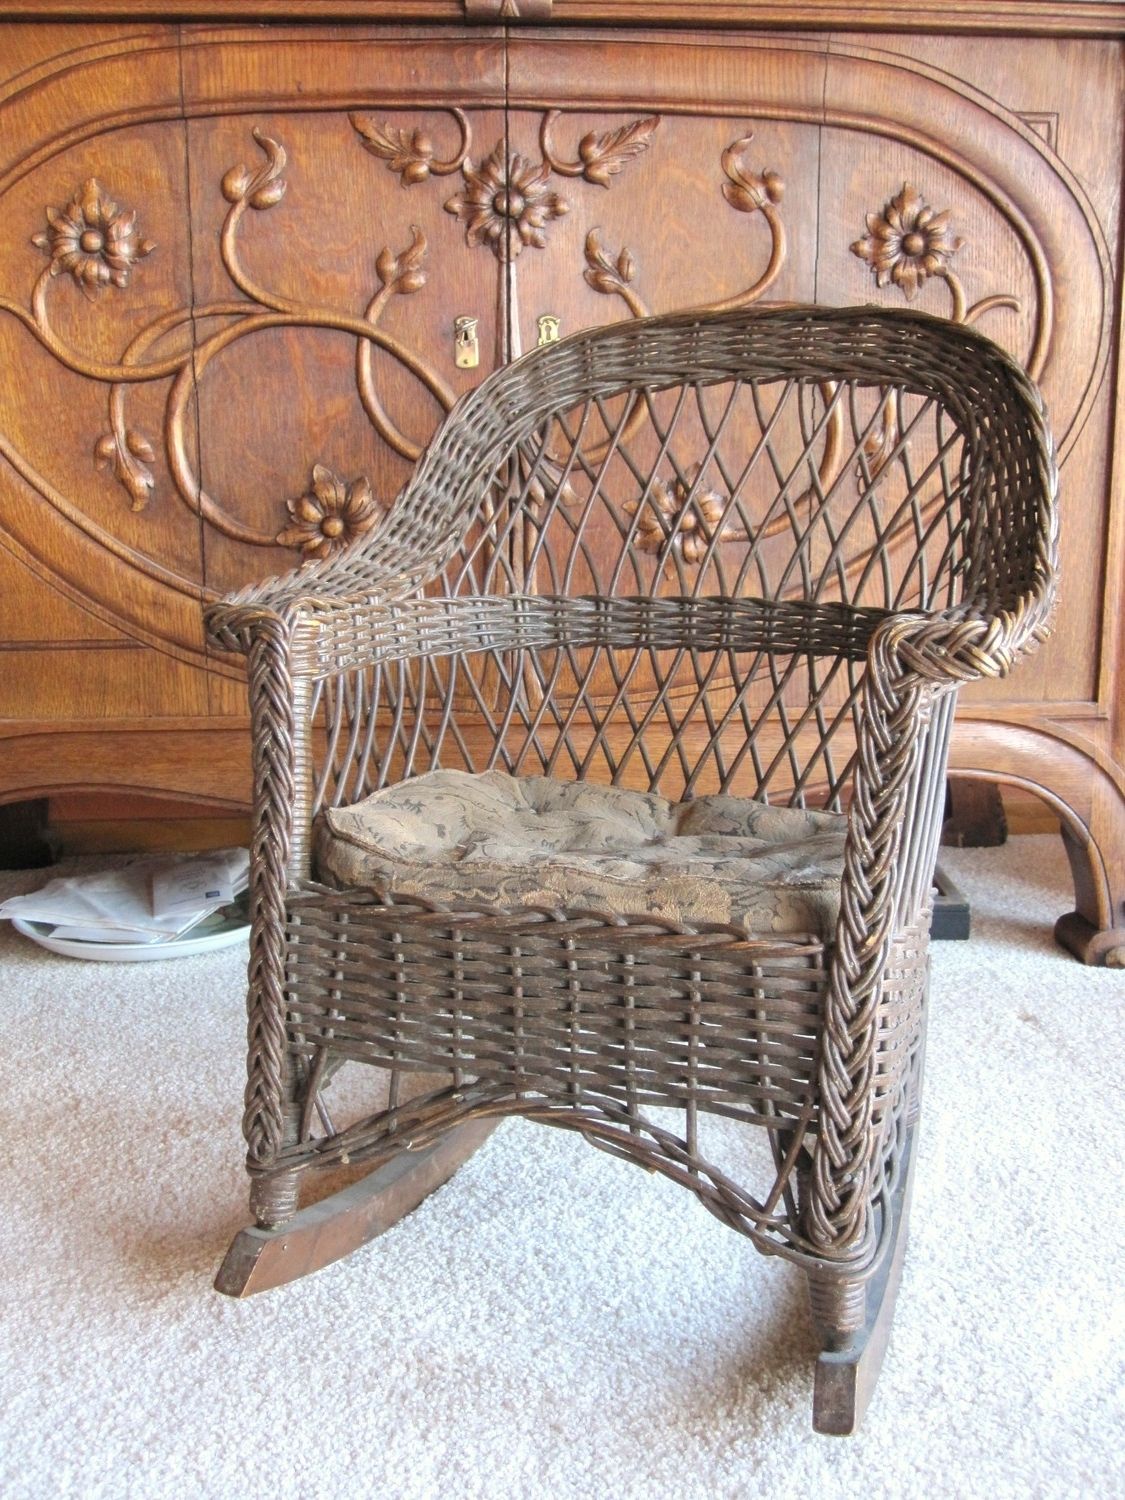 Famous Furniture: Antique Wicker Rocking Chair With Pattern Cushions And With Antique Wicker Rocking Chairs (View 1 of 15)